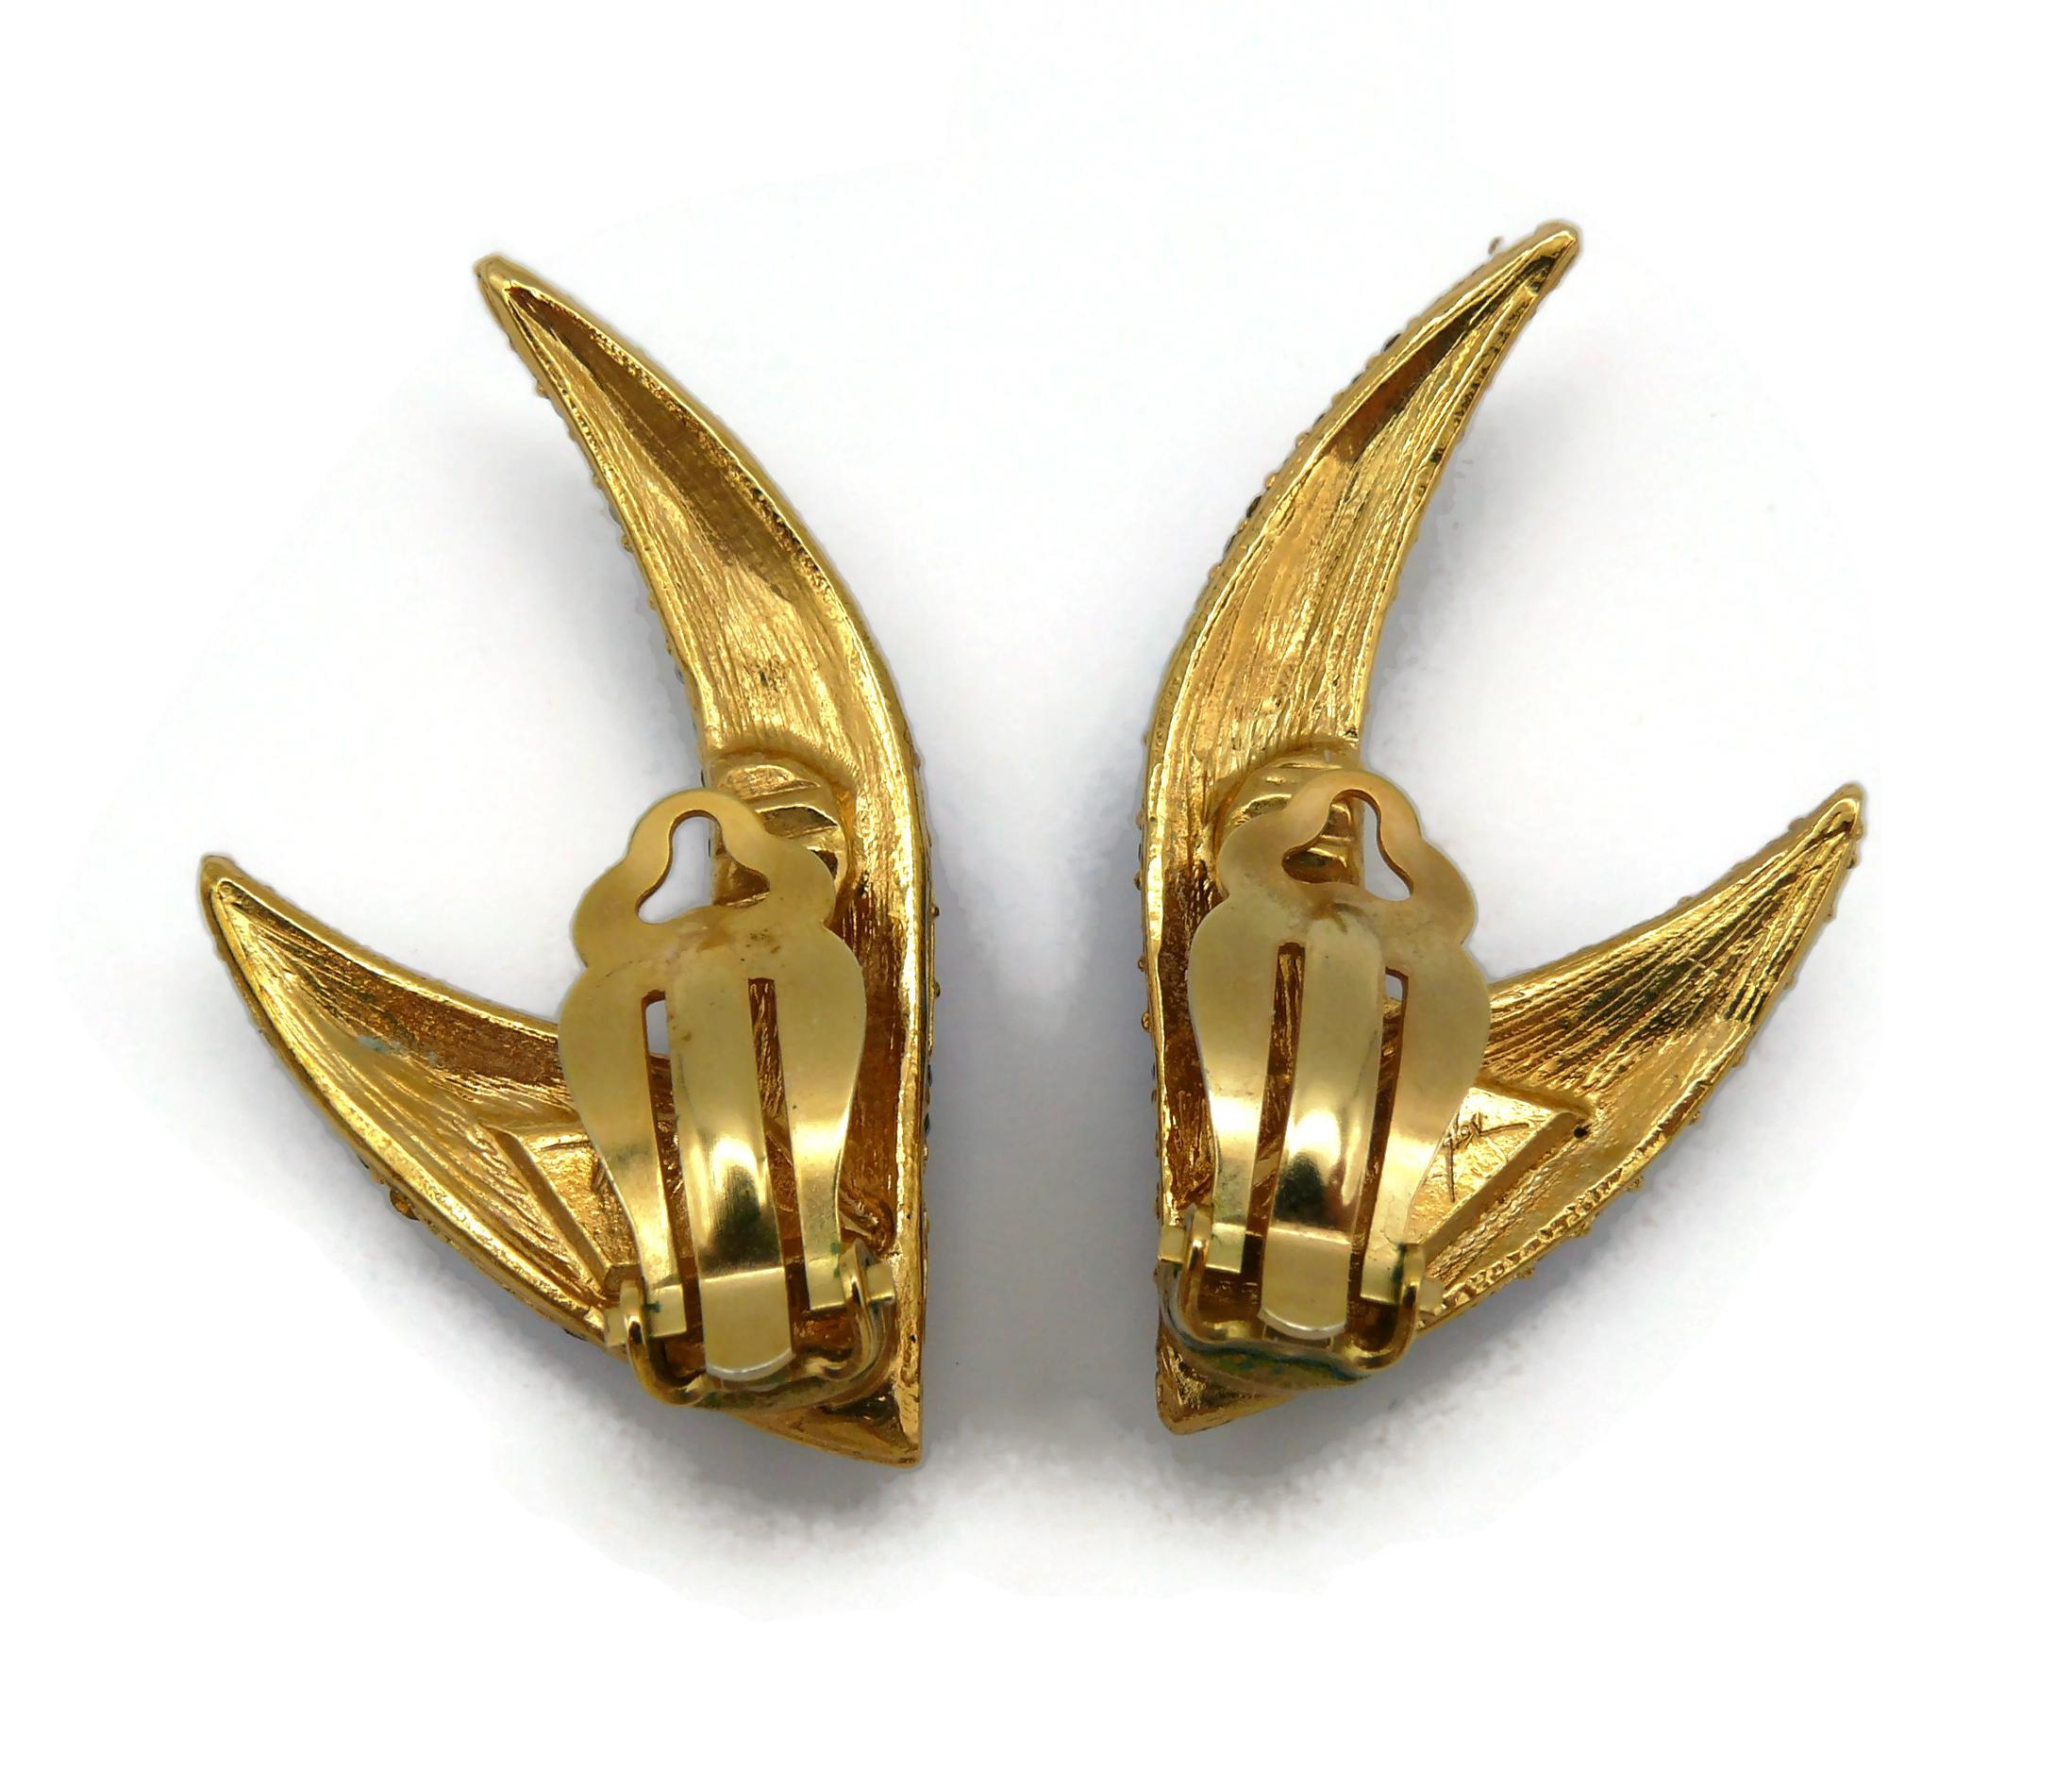 THIERRY MUGLER Vintage Jewelled Clip-On Earrings 2